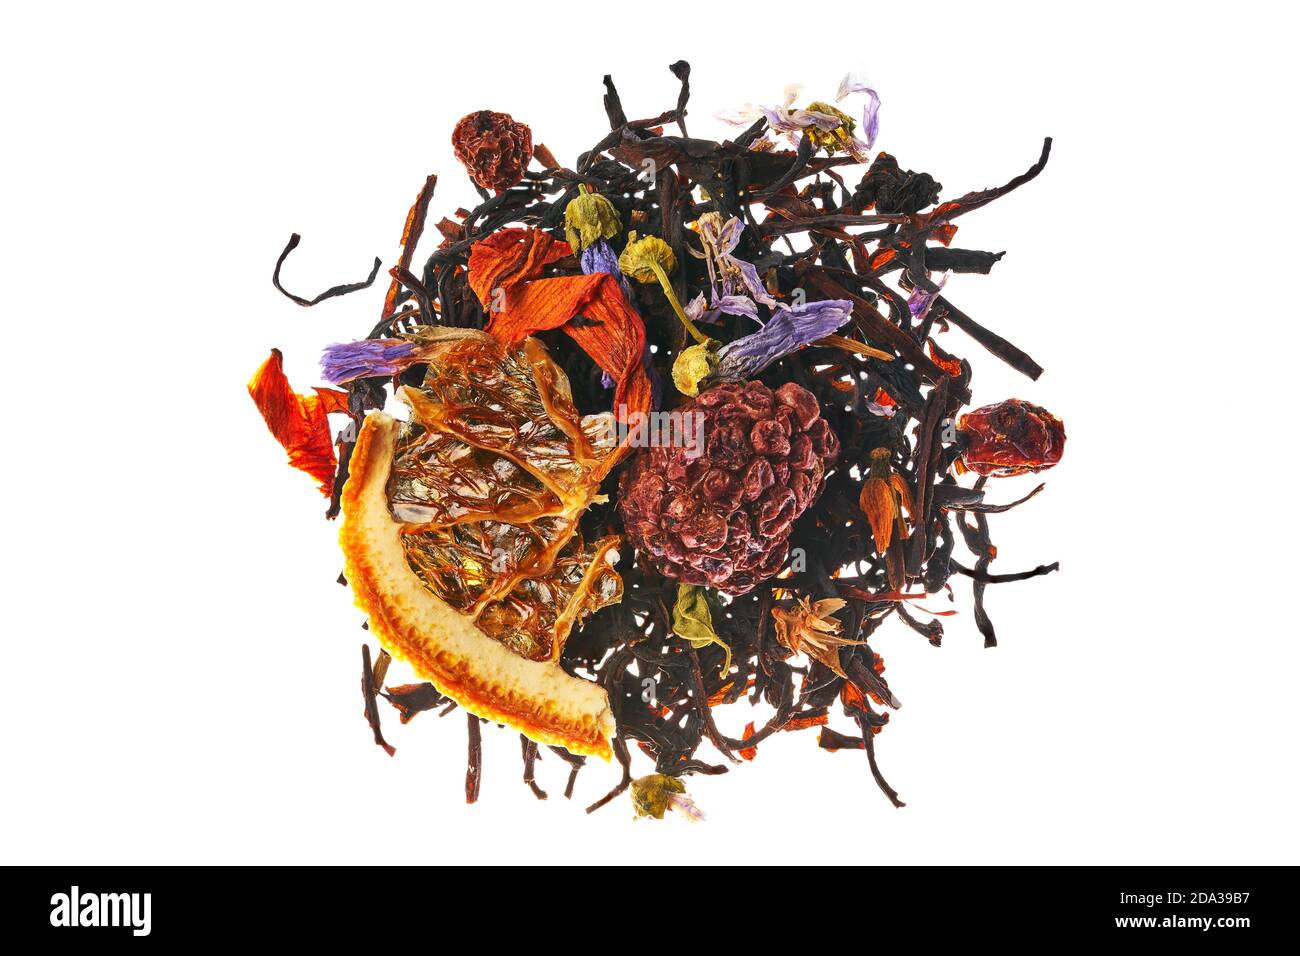 Assam Dikom with Lily petals, forget-me-nots, orange slices, red currant berries Stock Photo